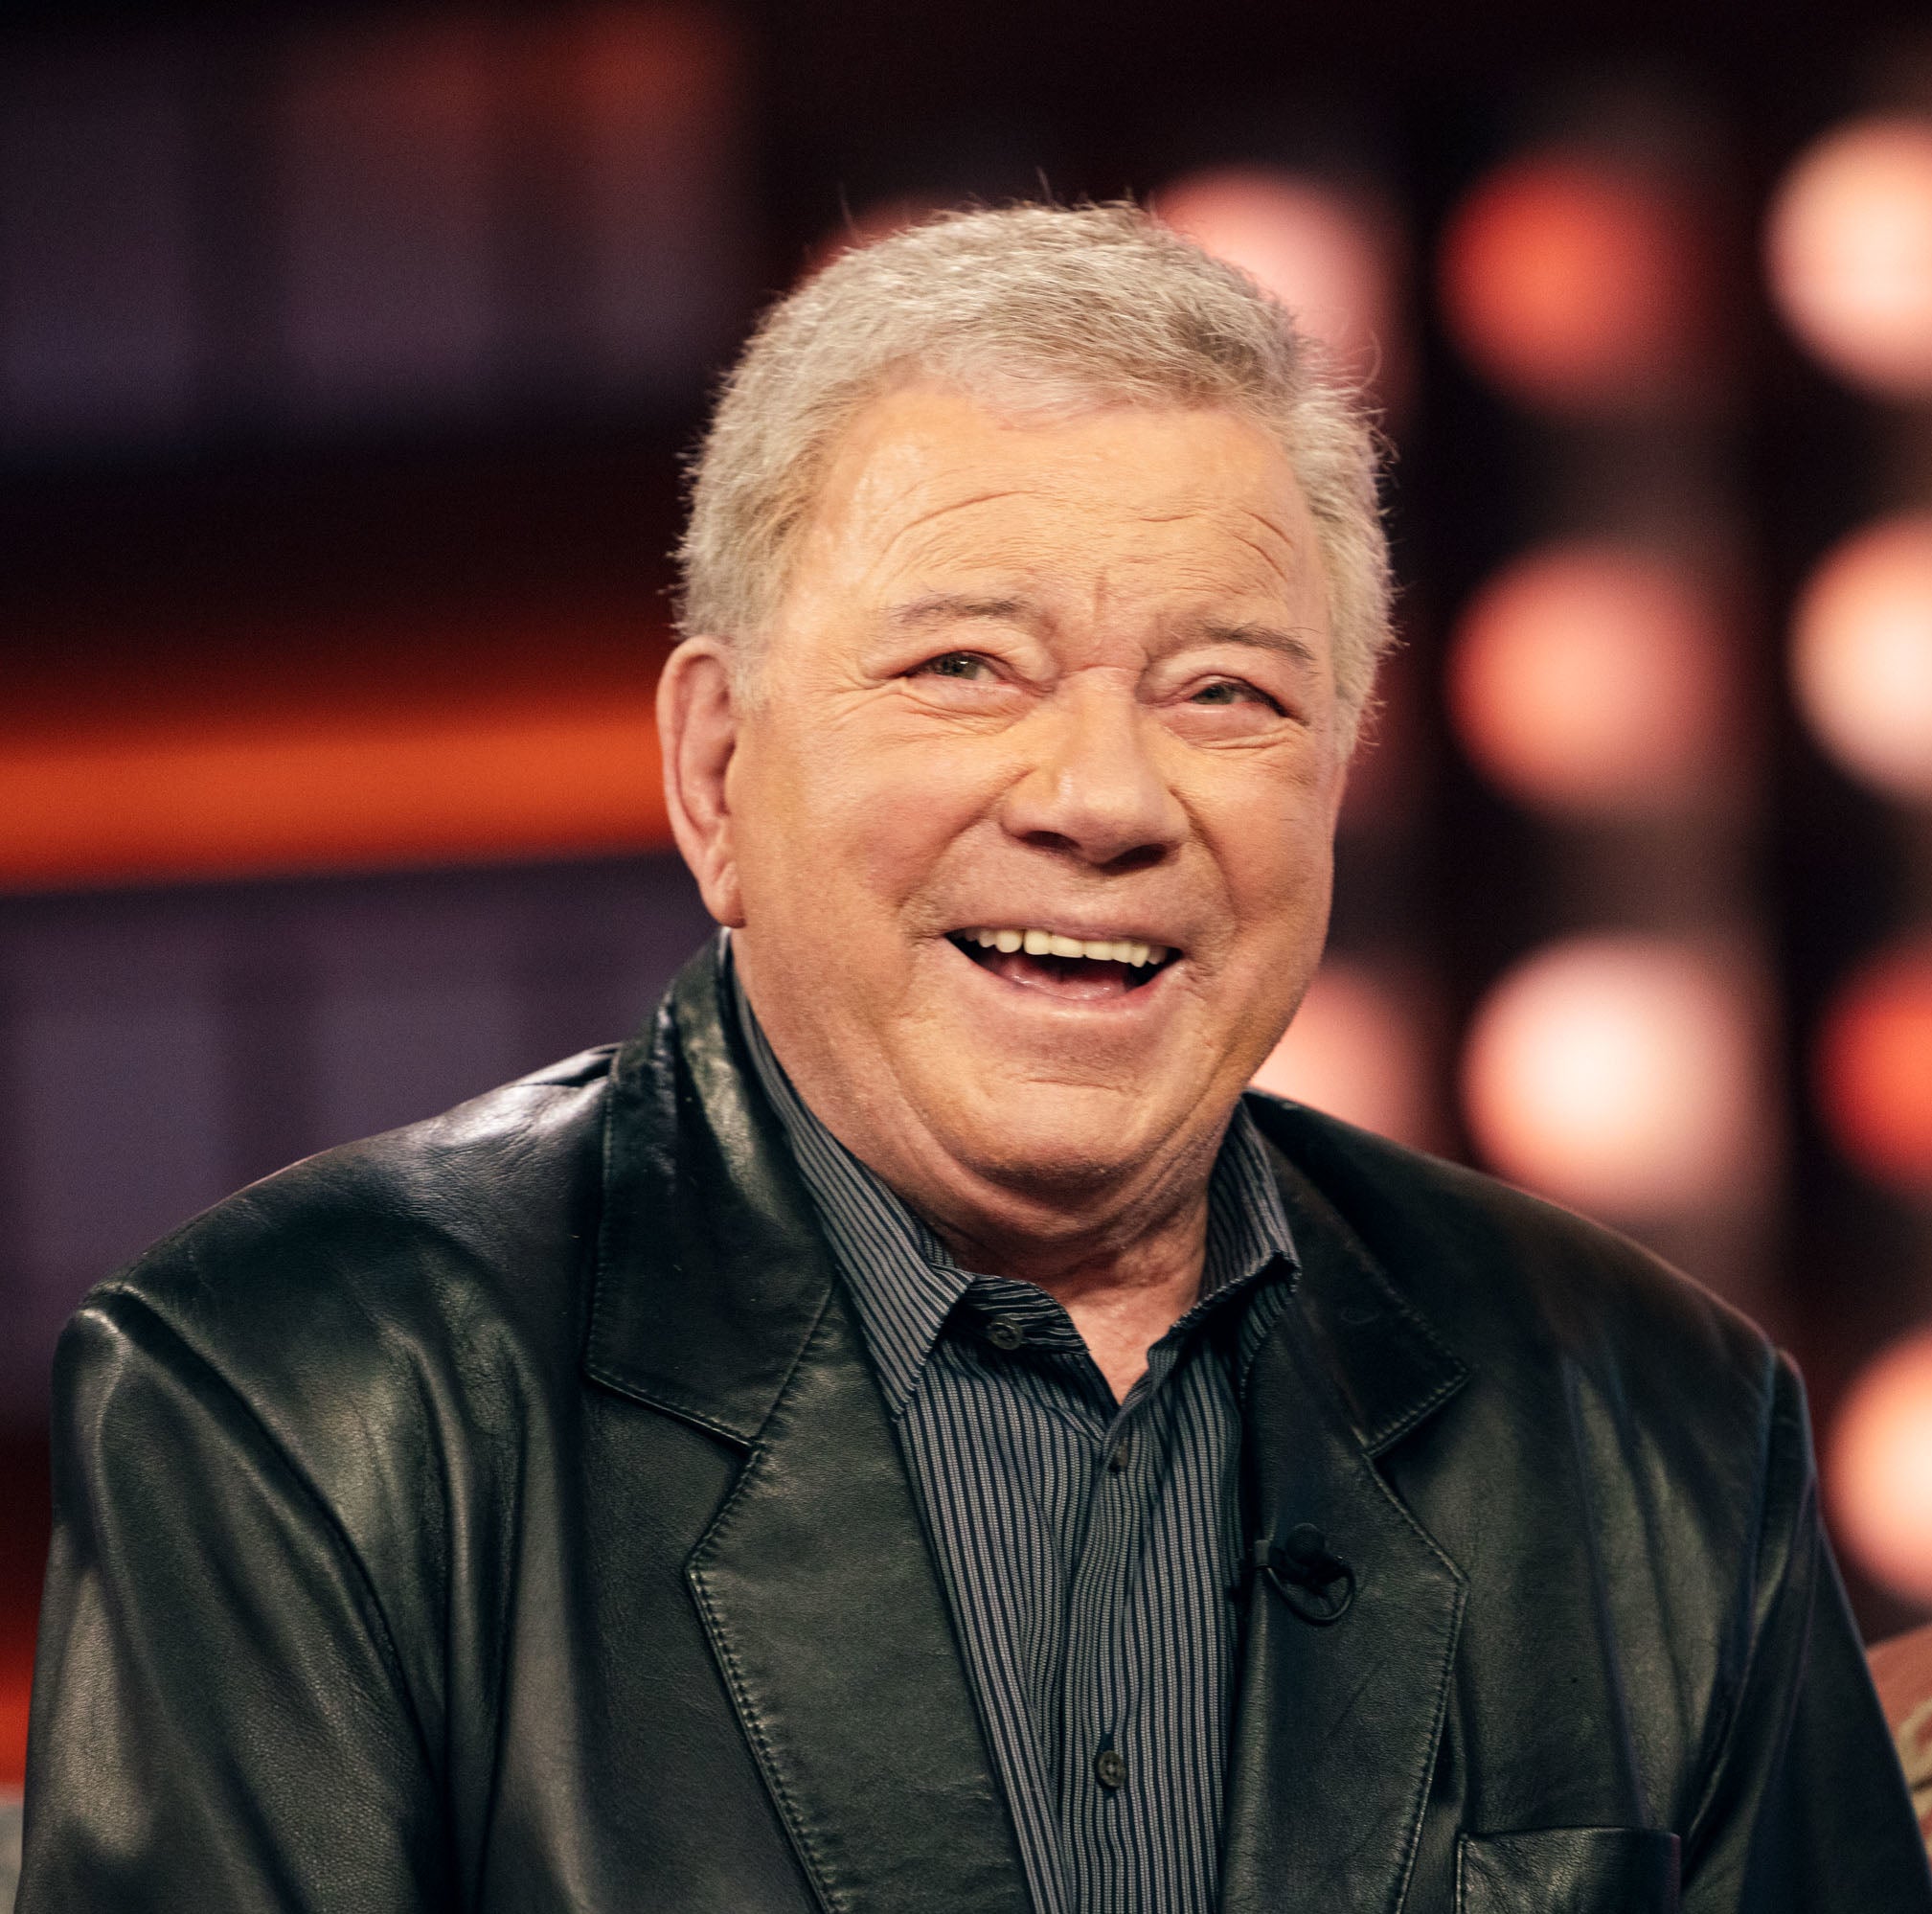 Smiling person in a leather jacket seated during an interview